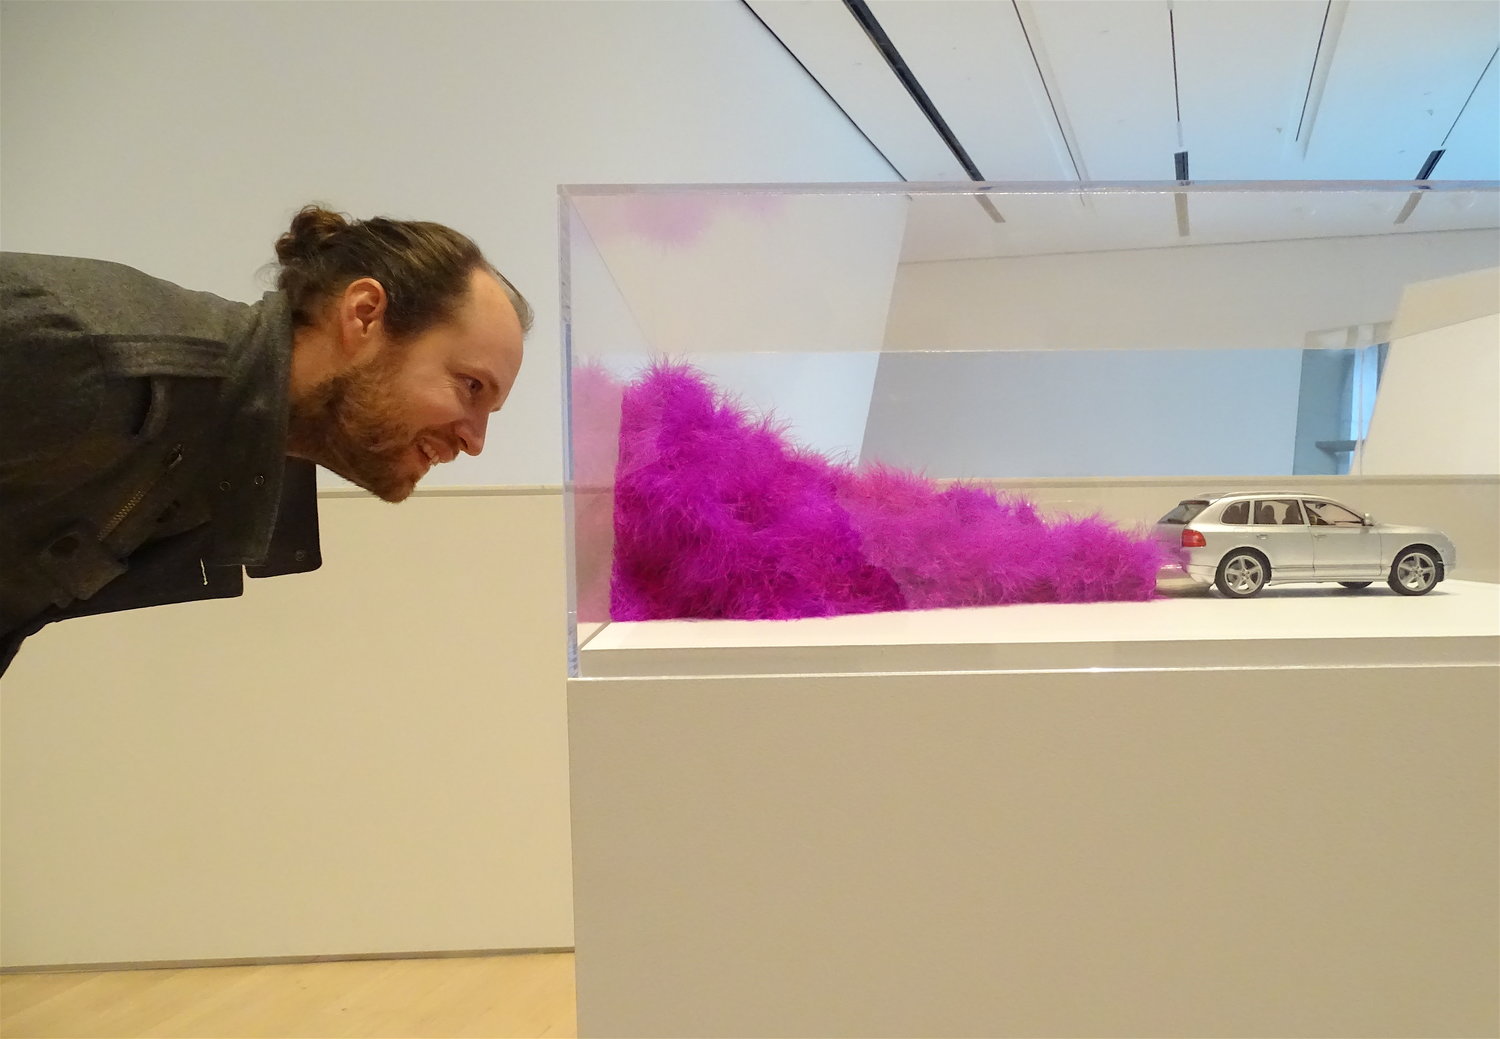 Photo of Steve Bridges looking at an art piece that depicts a model of a car with purple exhaust